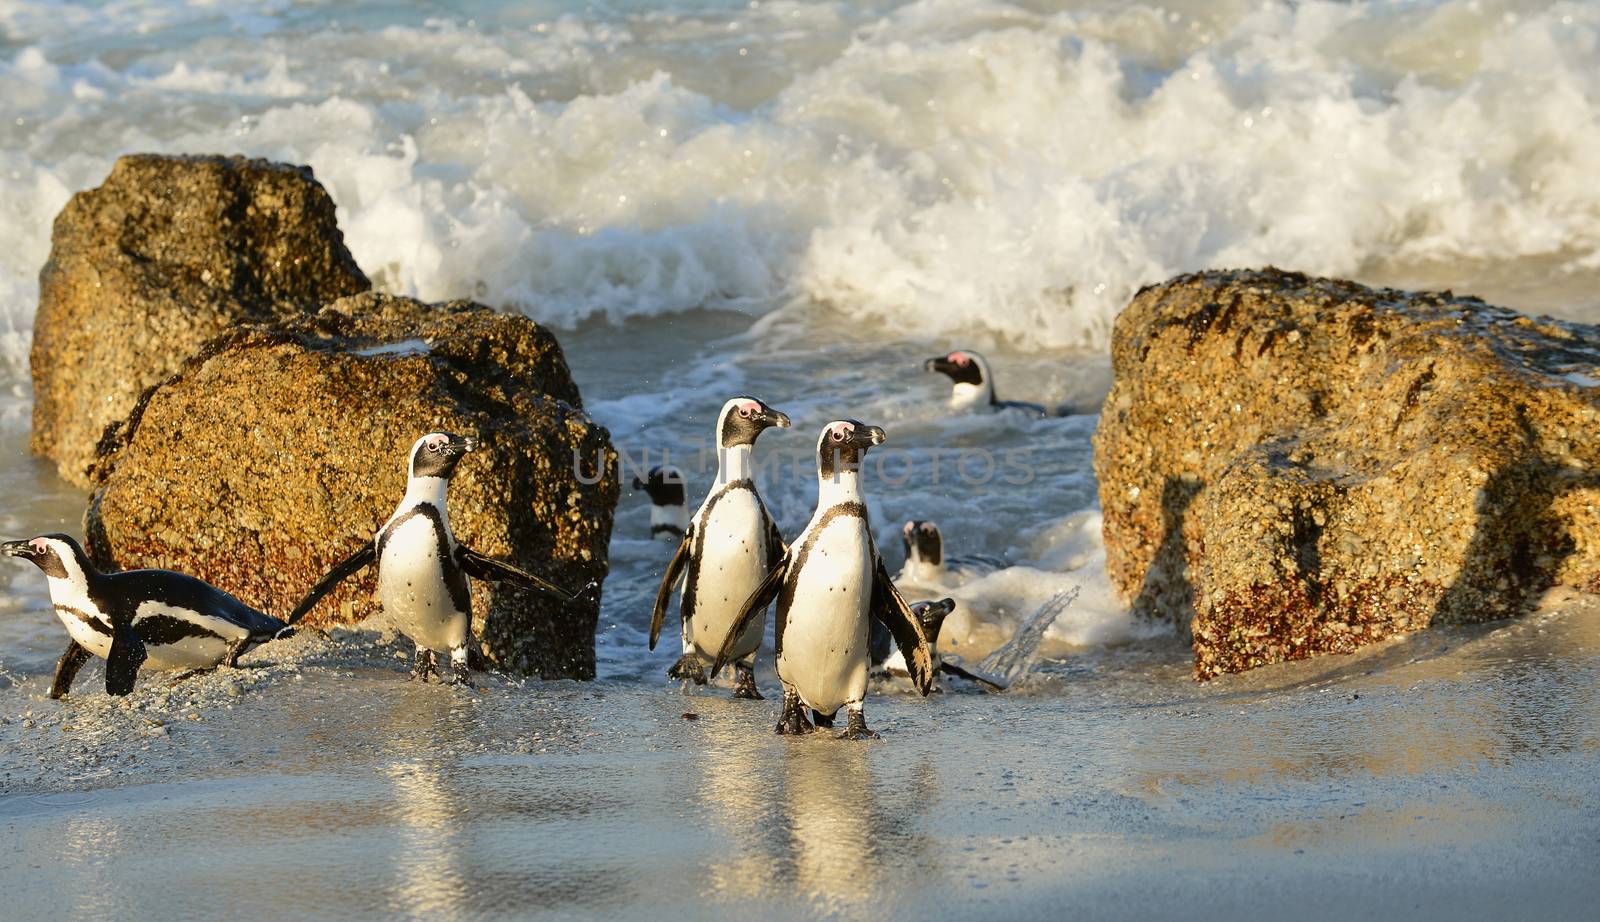 Walking  African penguins (spheniscus demersus) at the Beach. South Africa